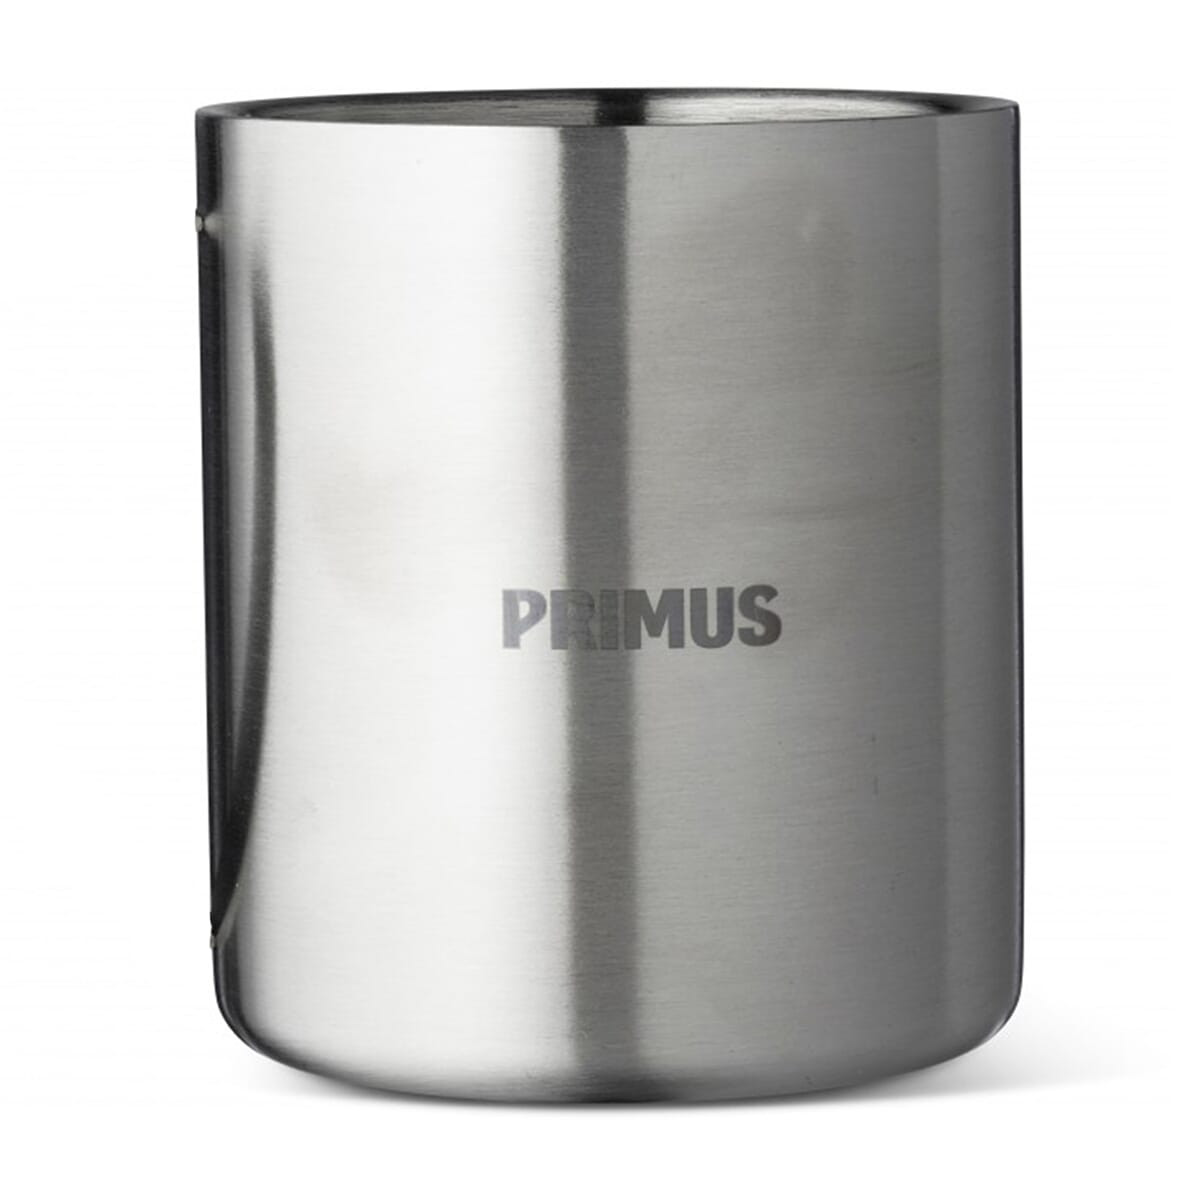 Primus 4 Season Stainless Steel Tea Coffee Cup Without Handle